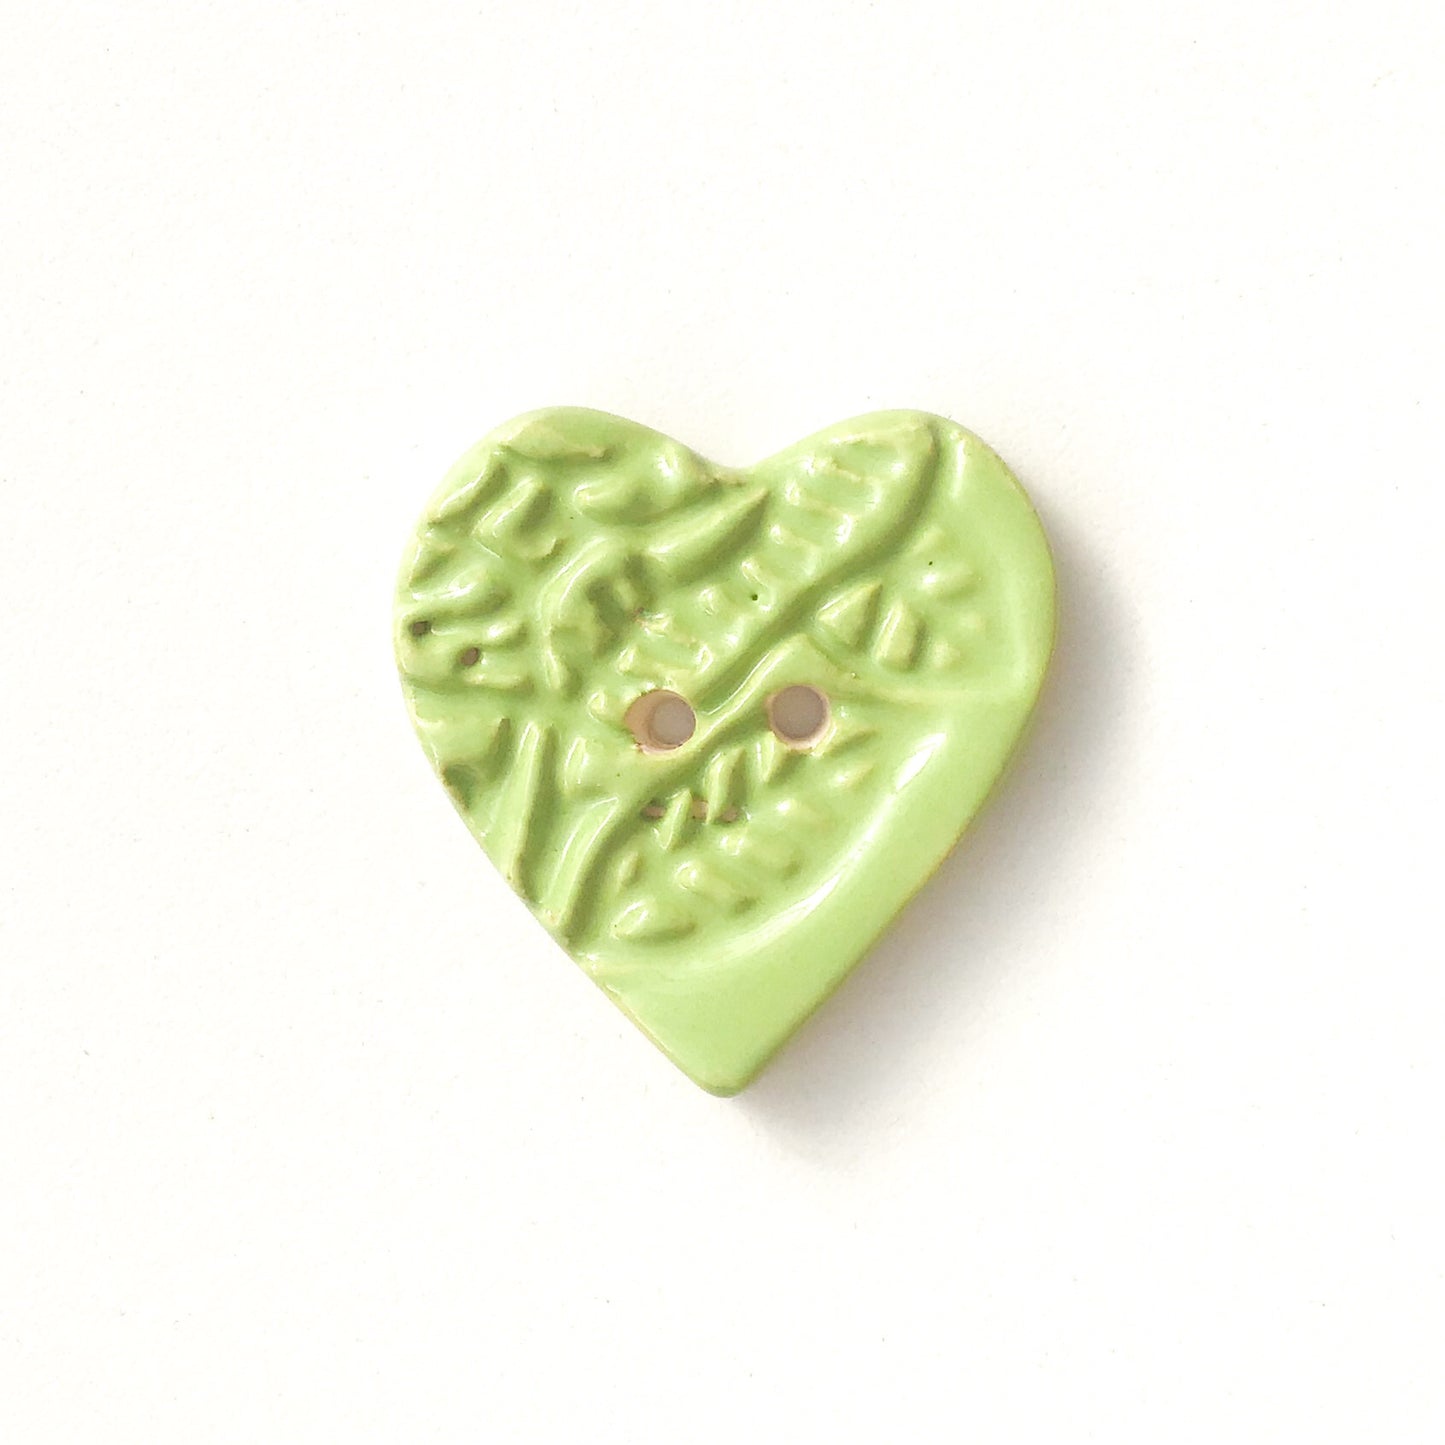 Large Stamped Heart Buttons - Ceramic Heart Button - 1 3/8"